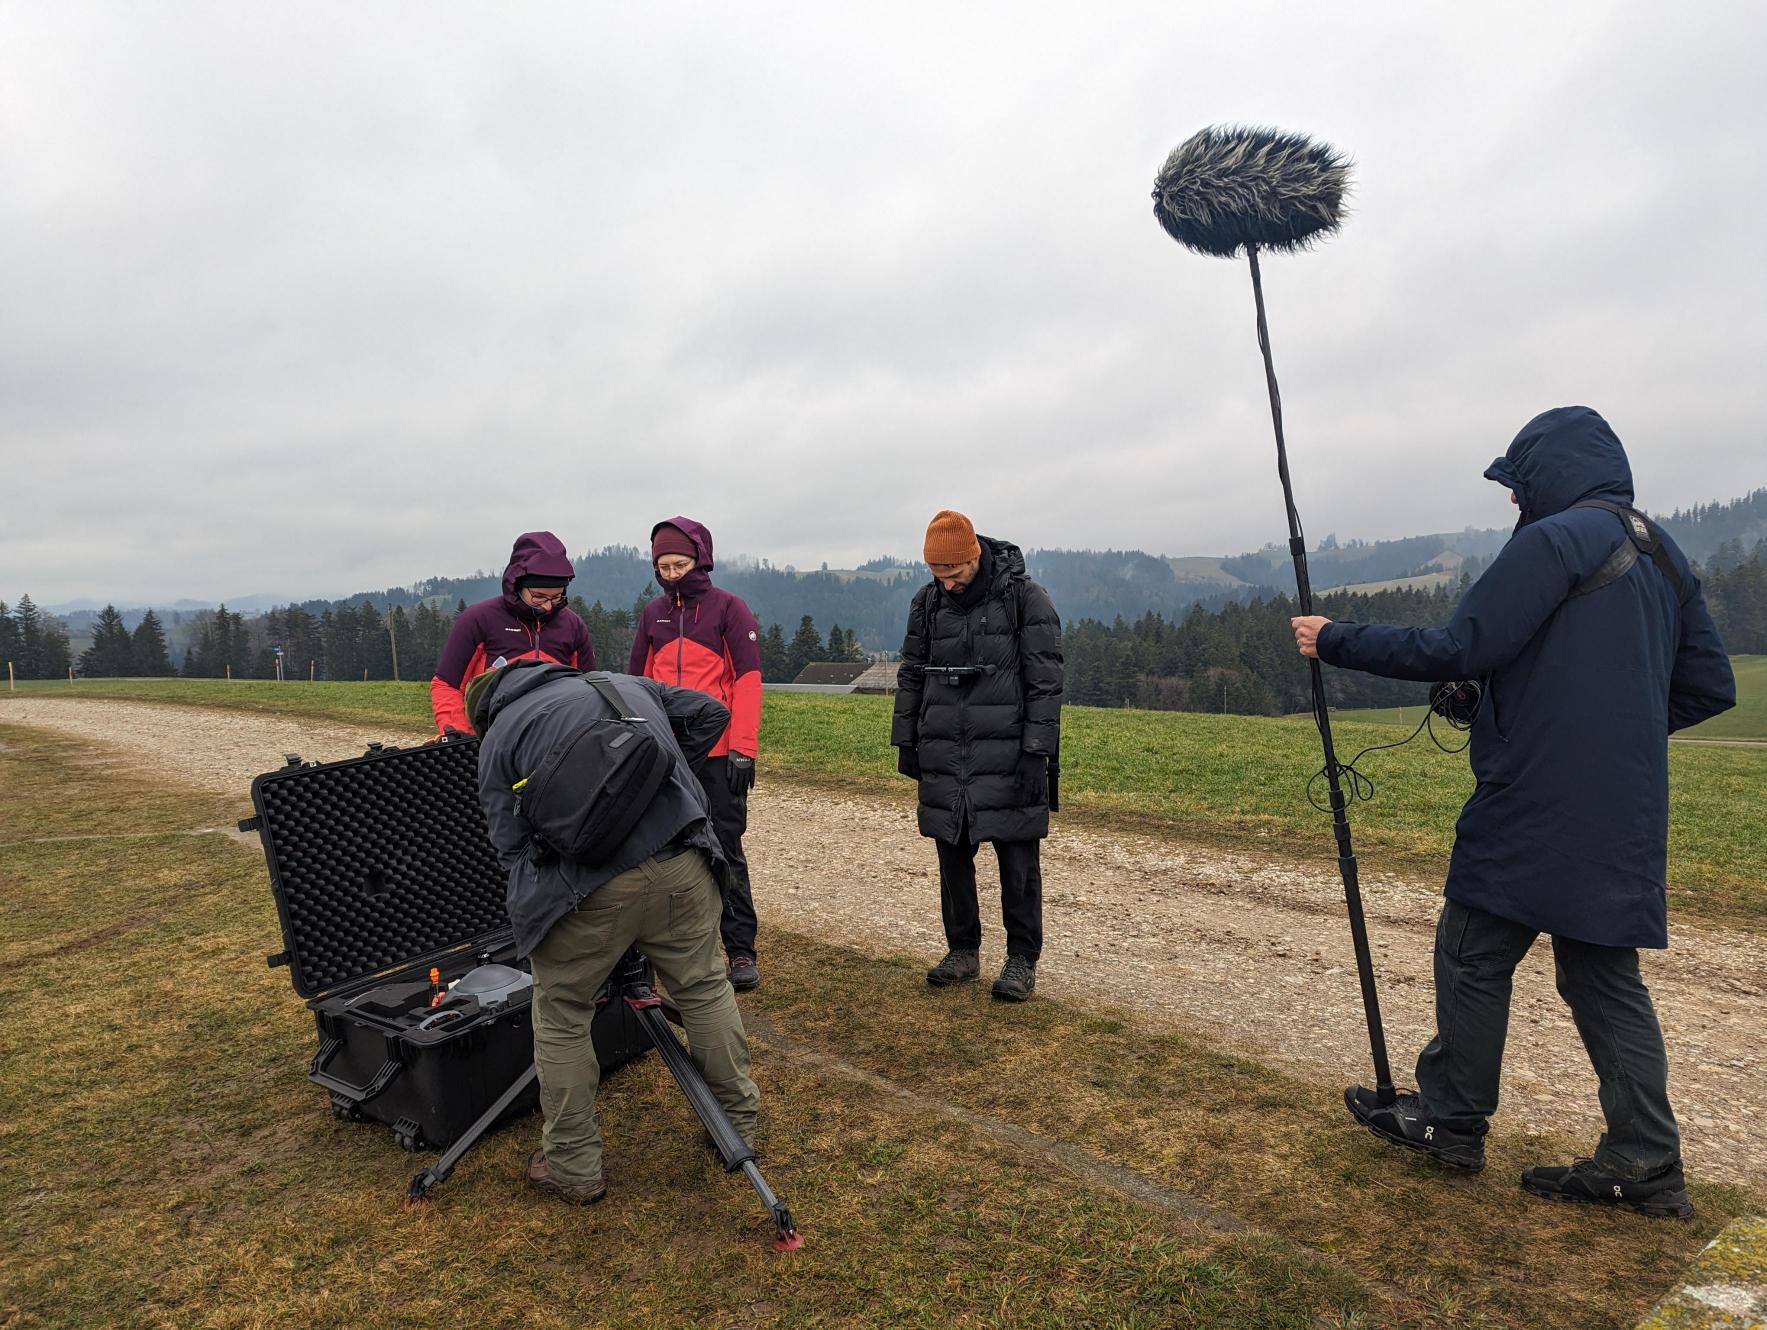 Enlarged view: Yesterday on 27th of February a film crew visited our main site to get an impression of our setup and record some of our experiments. 